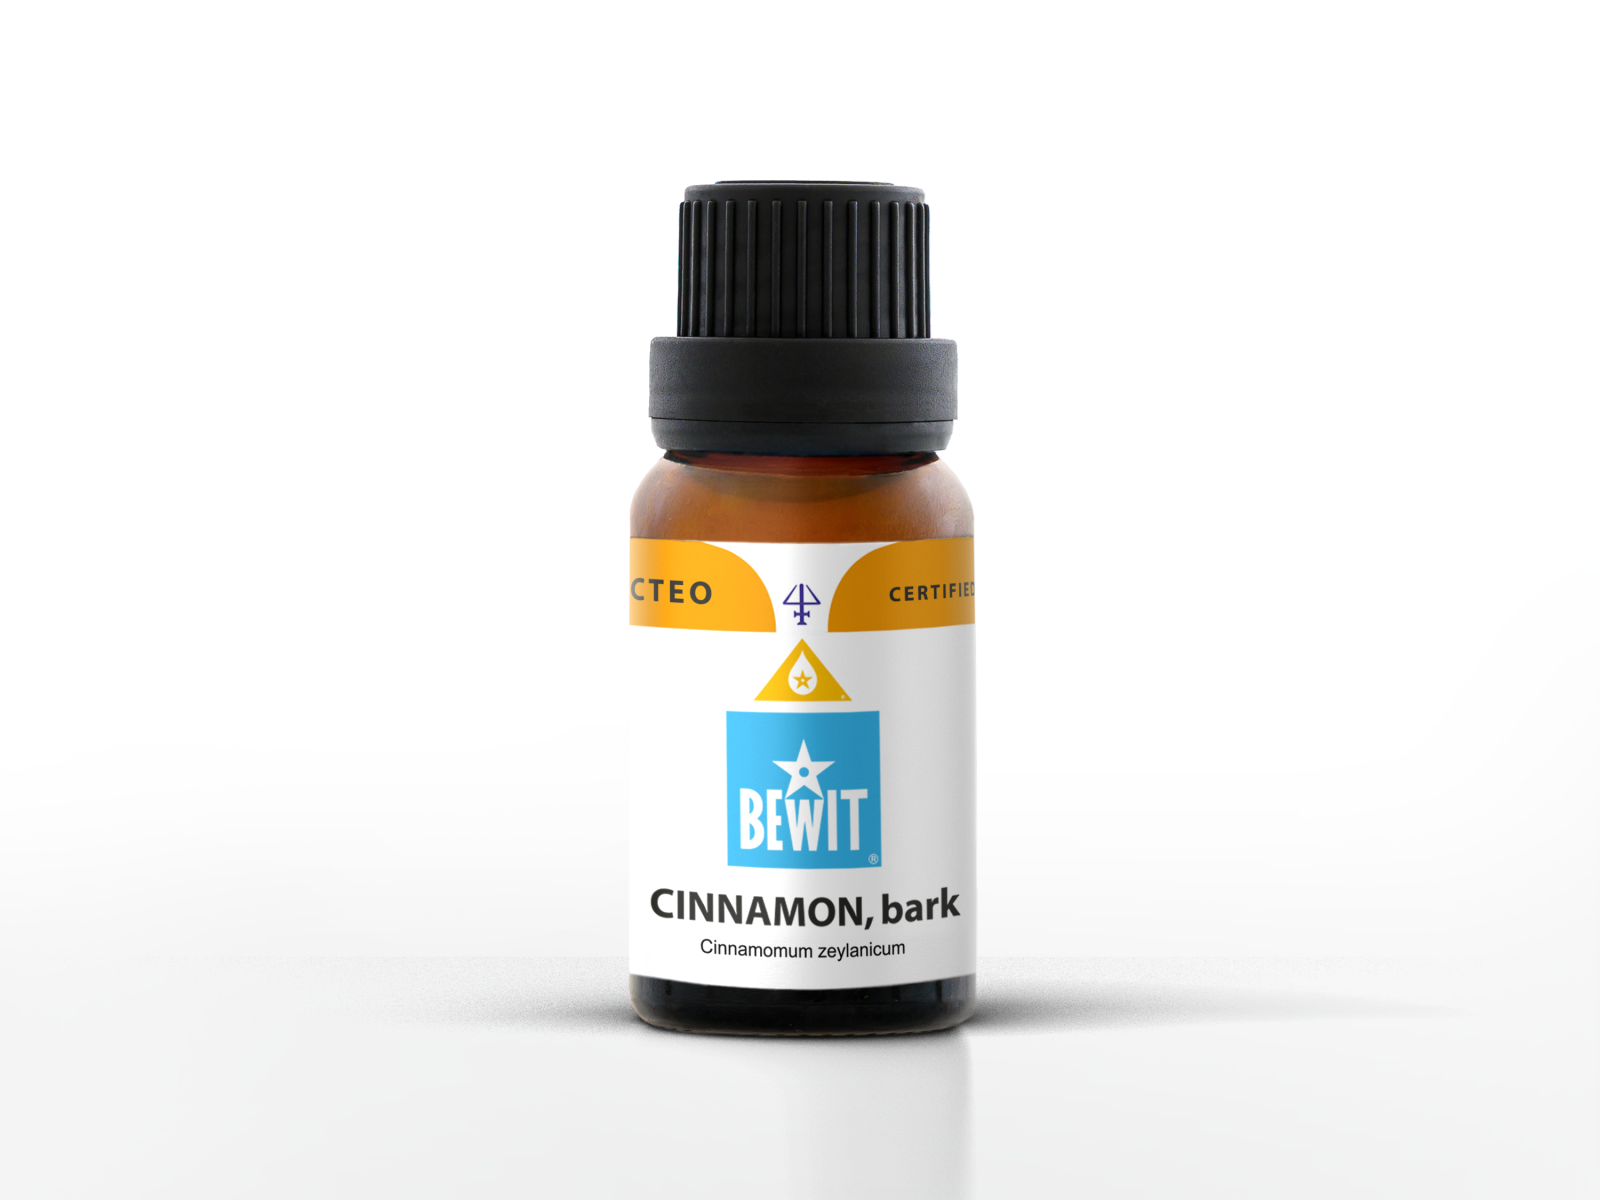 Cinnamon, Bark - This is a 100% pure essential oil - 3